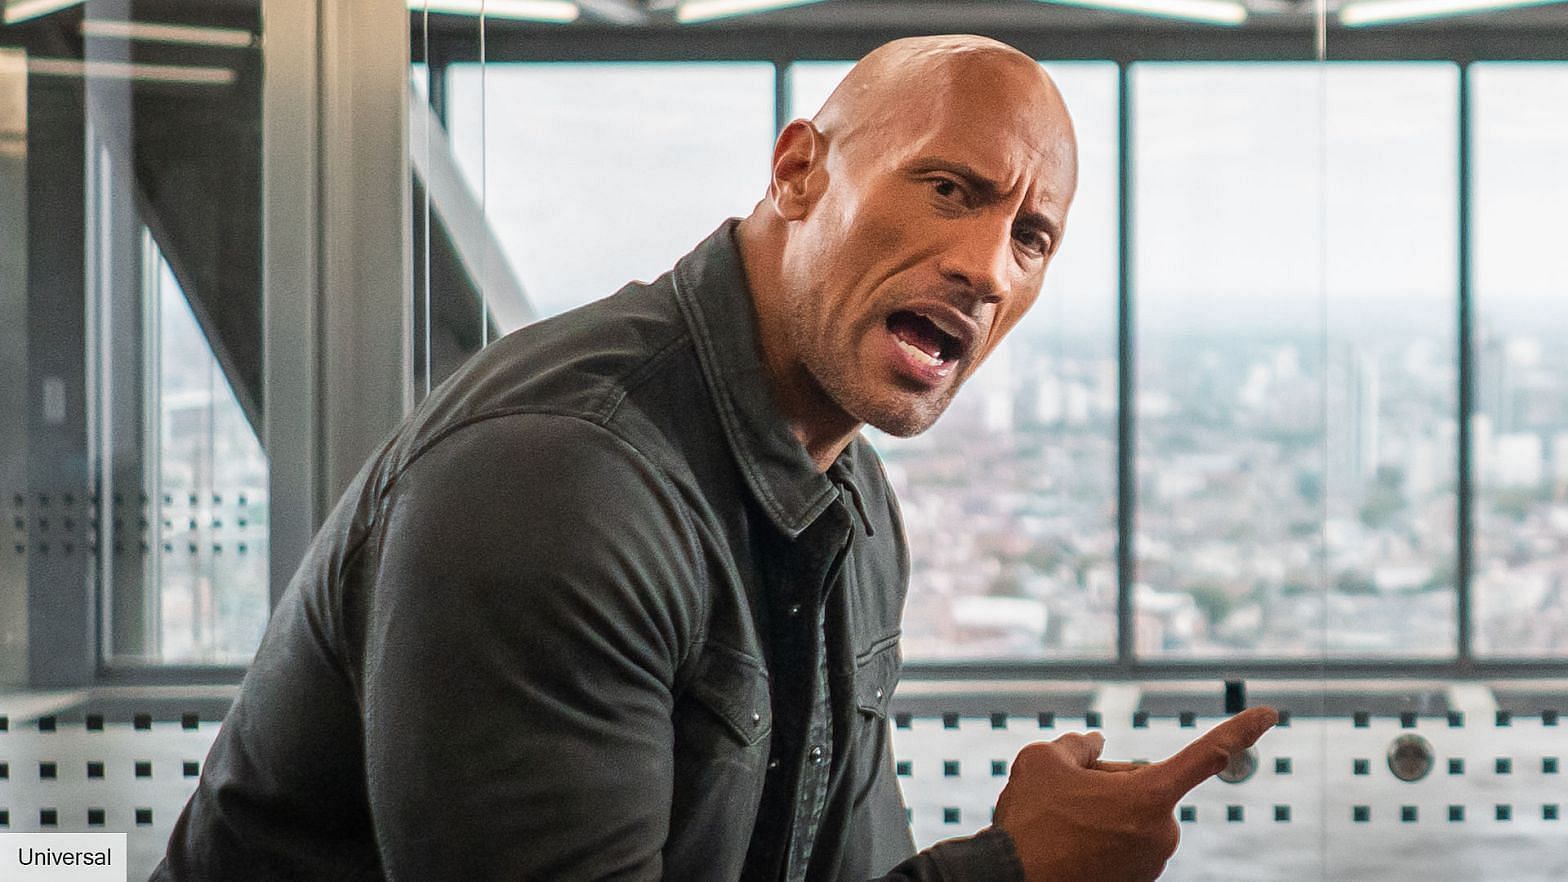 Vin Diesel and Dwayne Johnson in Fast and Furious 6 (Image via Universal)